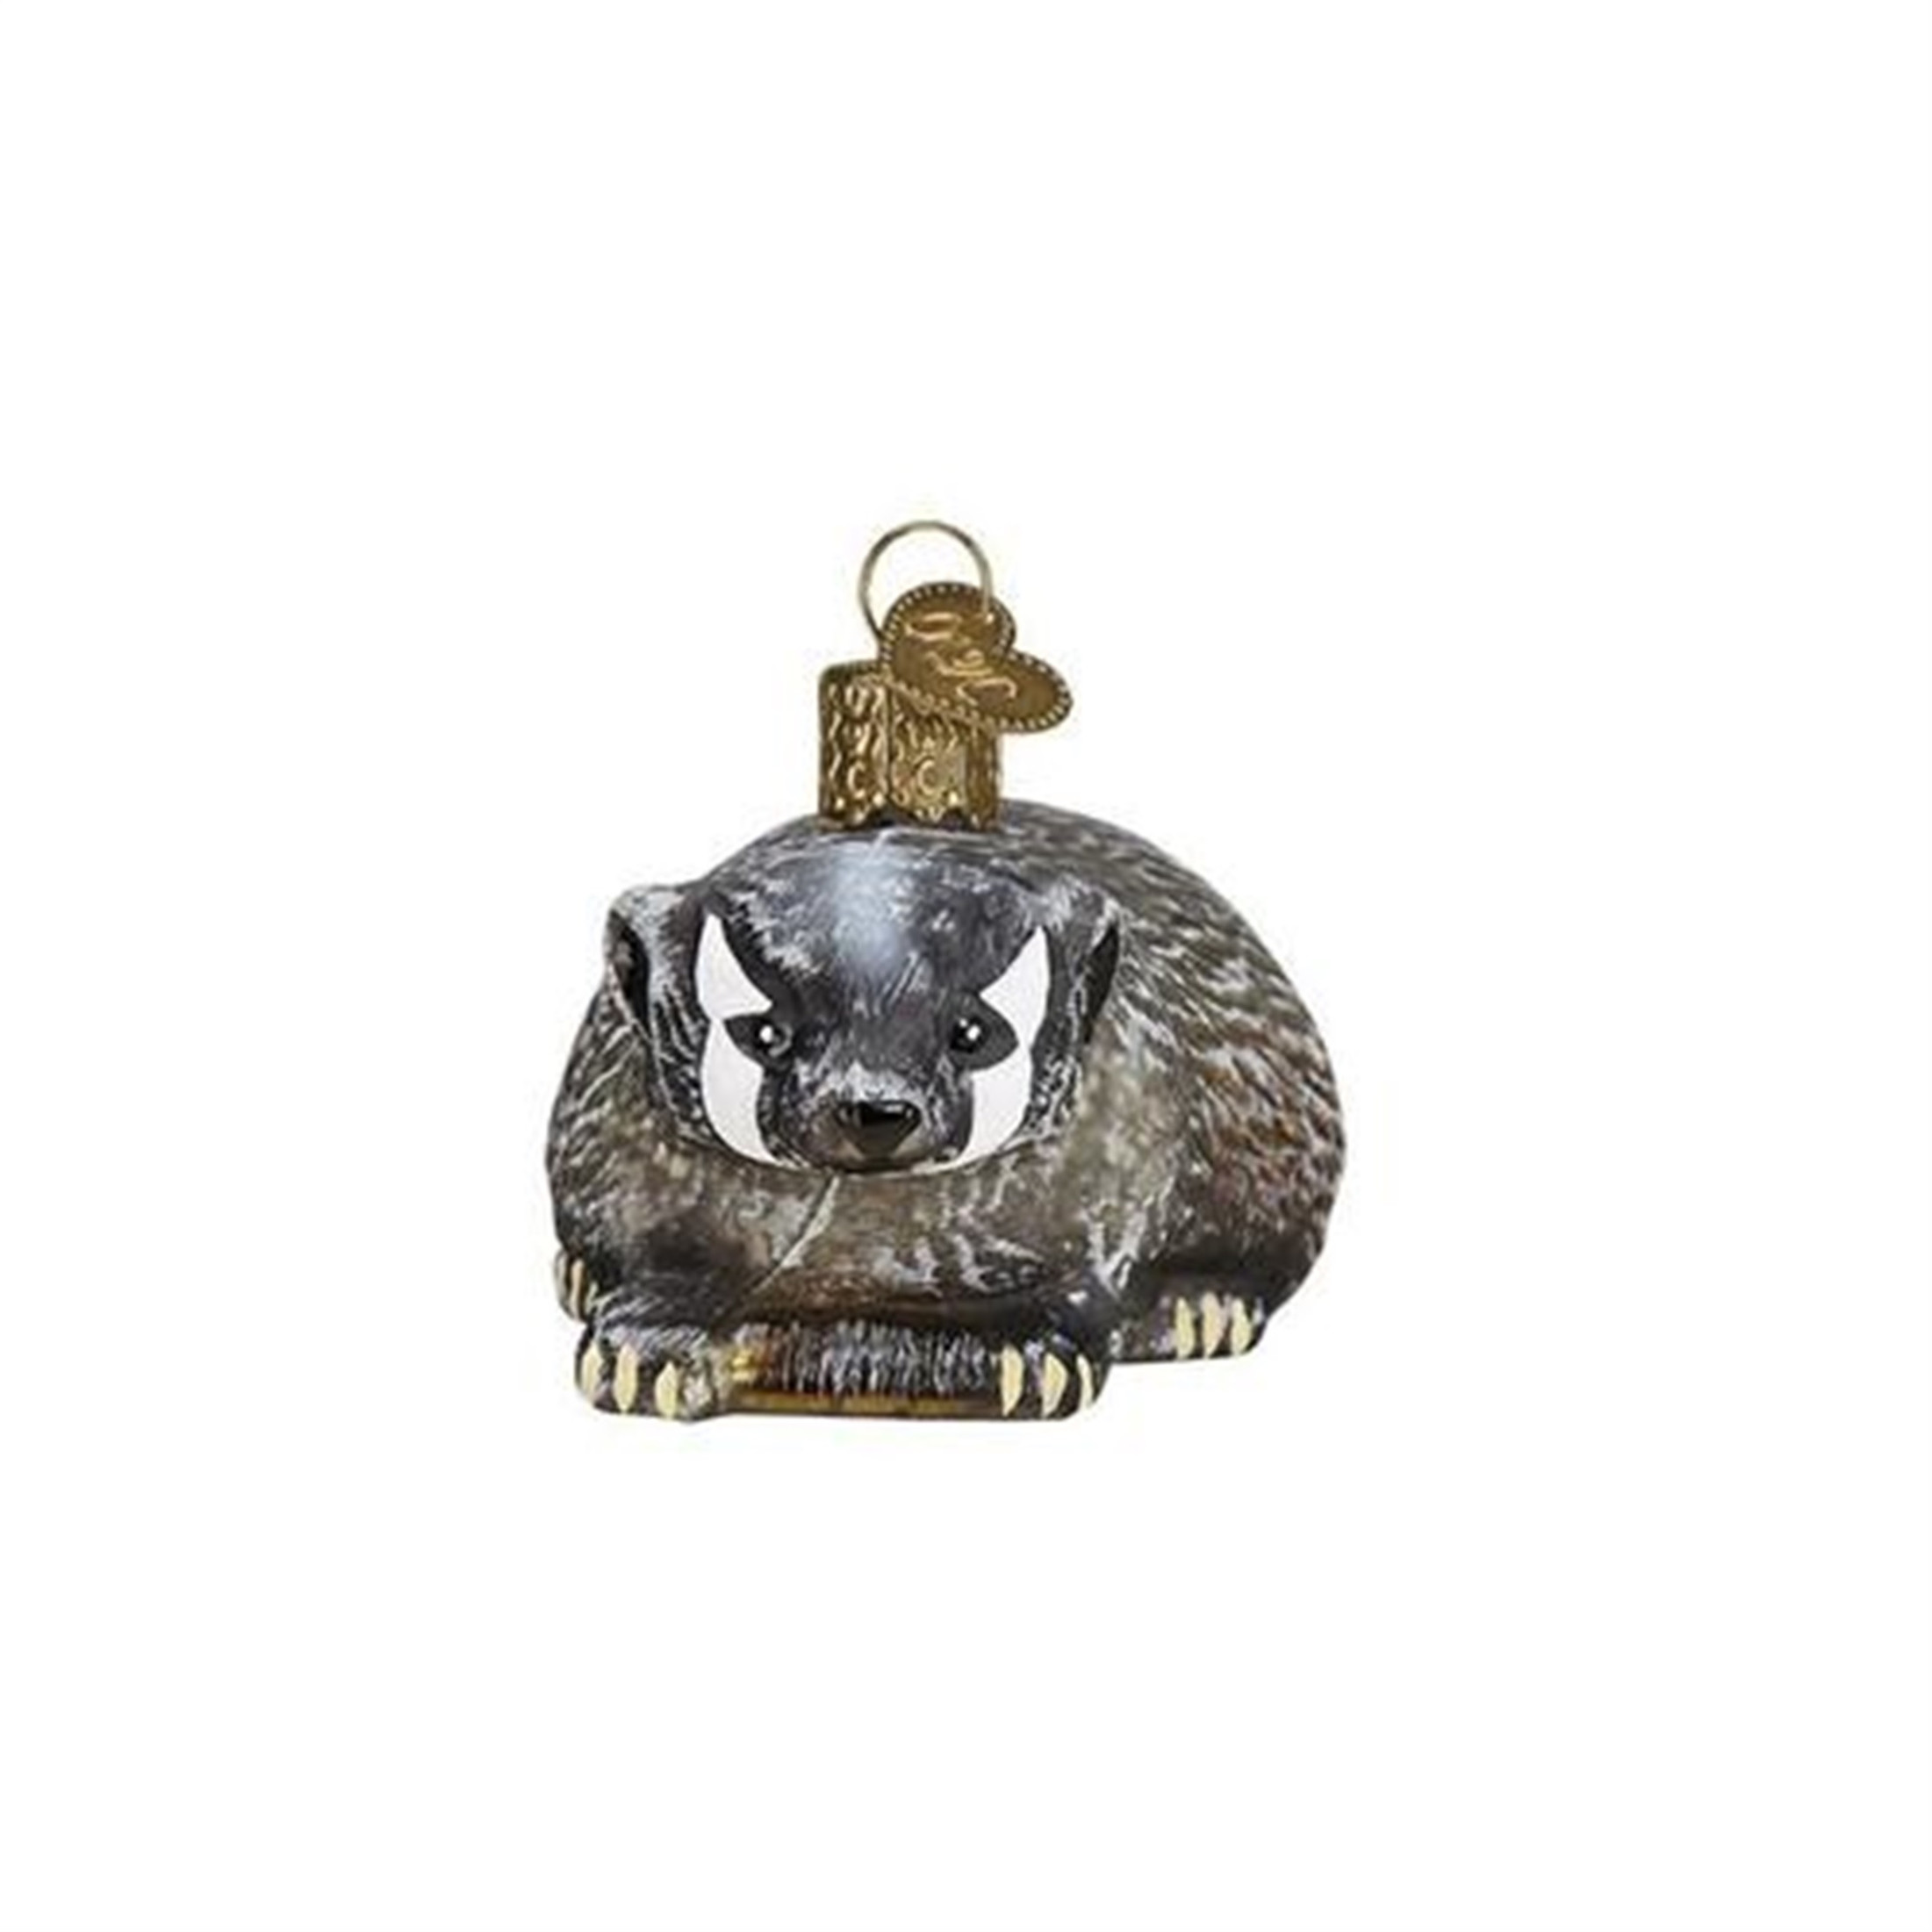 Old World Christmas Glass Blown Ornament For Christmas Tree, Vintage Badger (With OWC Gift Box)